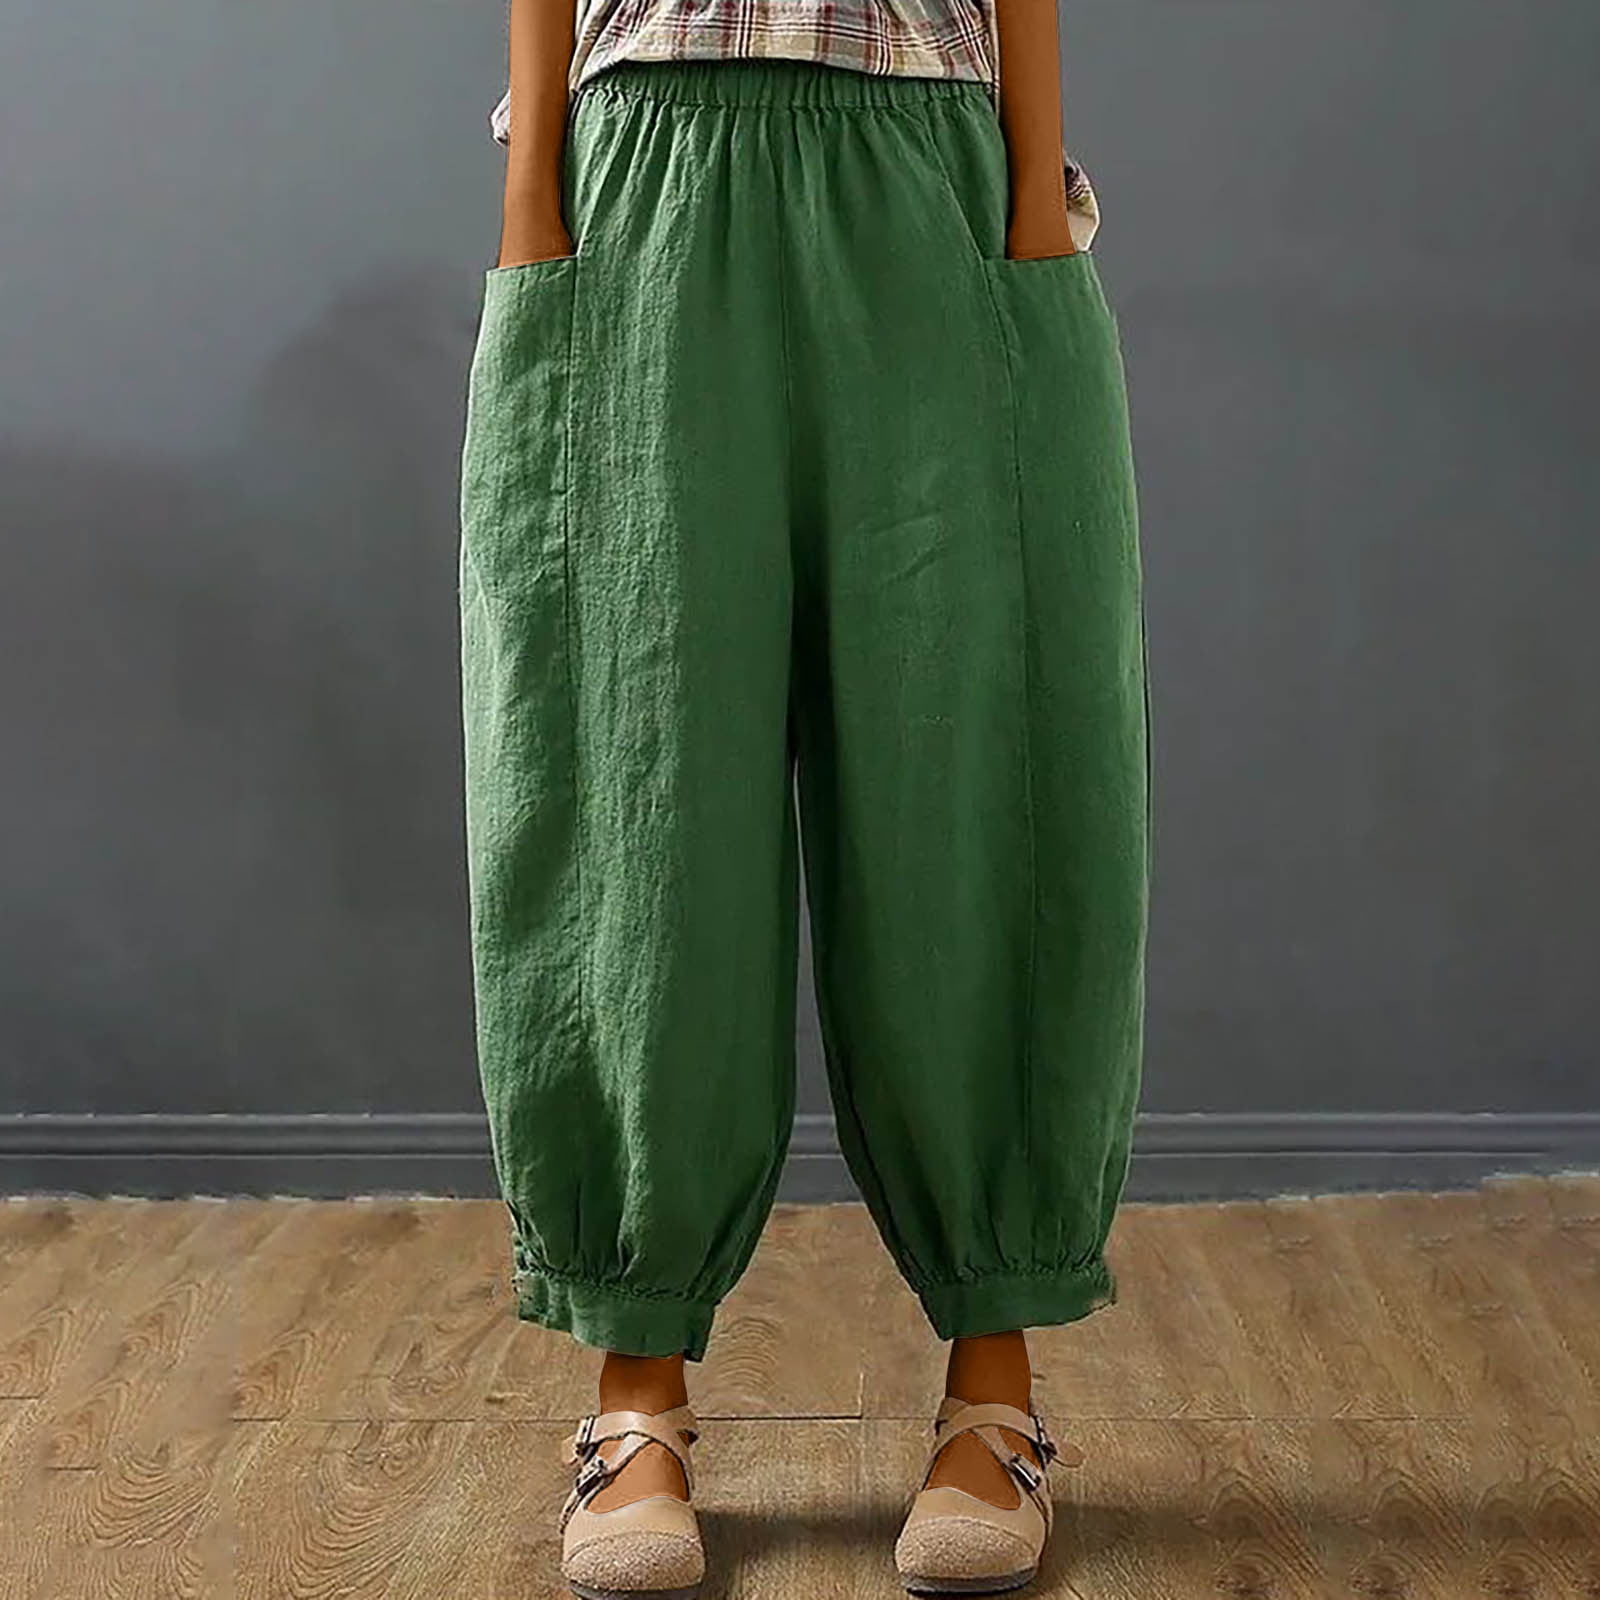 Linen Wide Leg Pants for Women Summer Casual Elastic Waisted Pants Loose  Baggy Cotton Comfy Cuffed Pants with Pockets (Medium, White 16) 